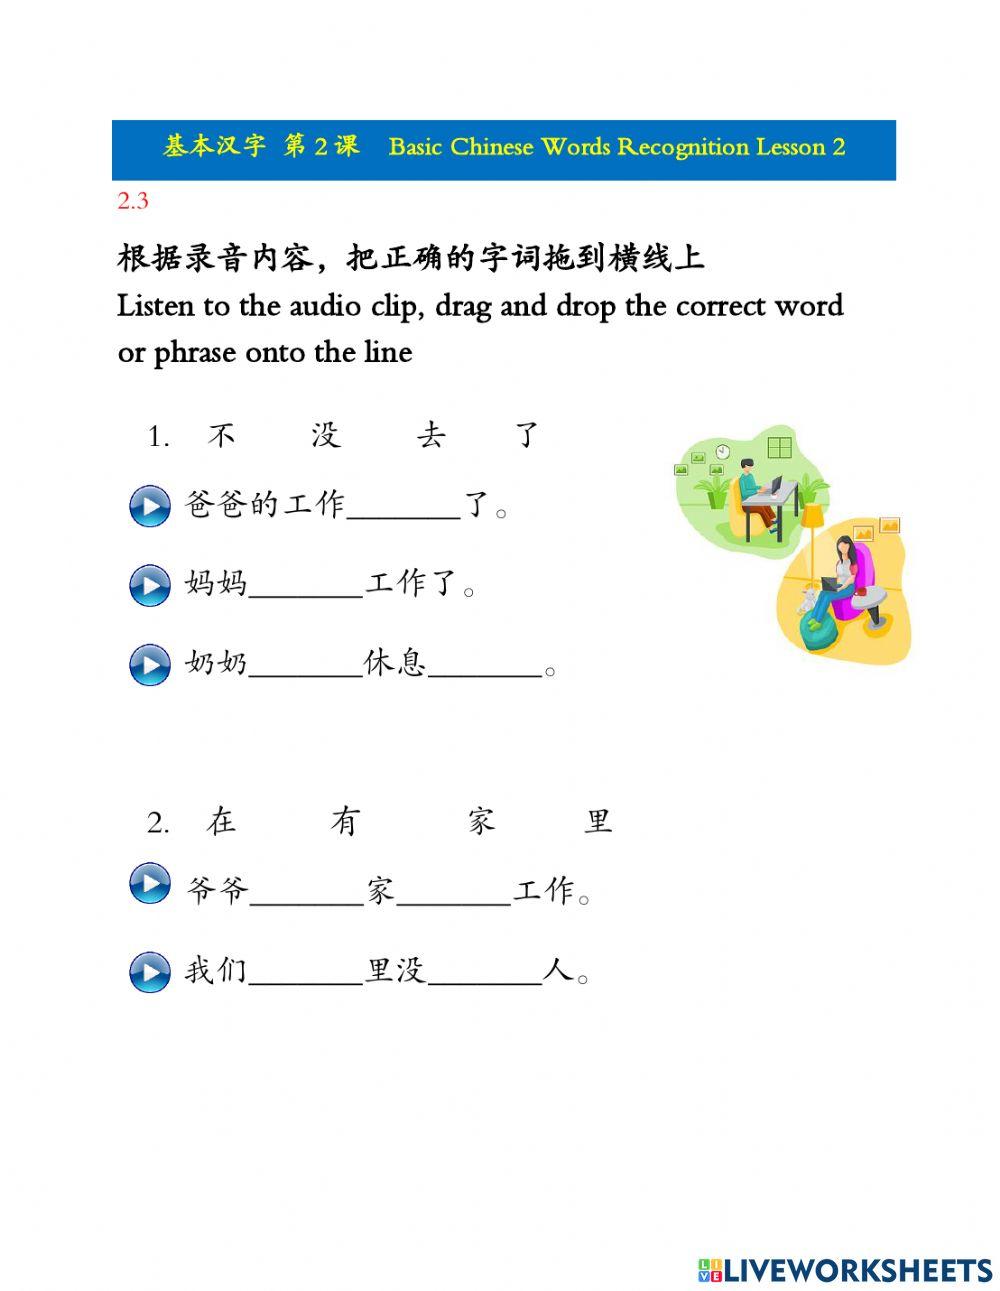 Basic Chinese Words Recognition 2.3